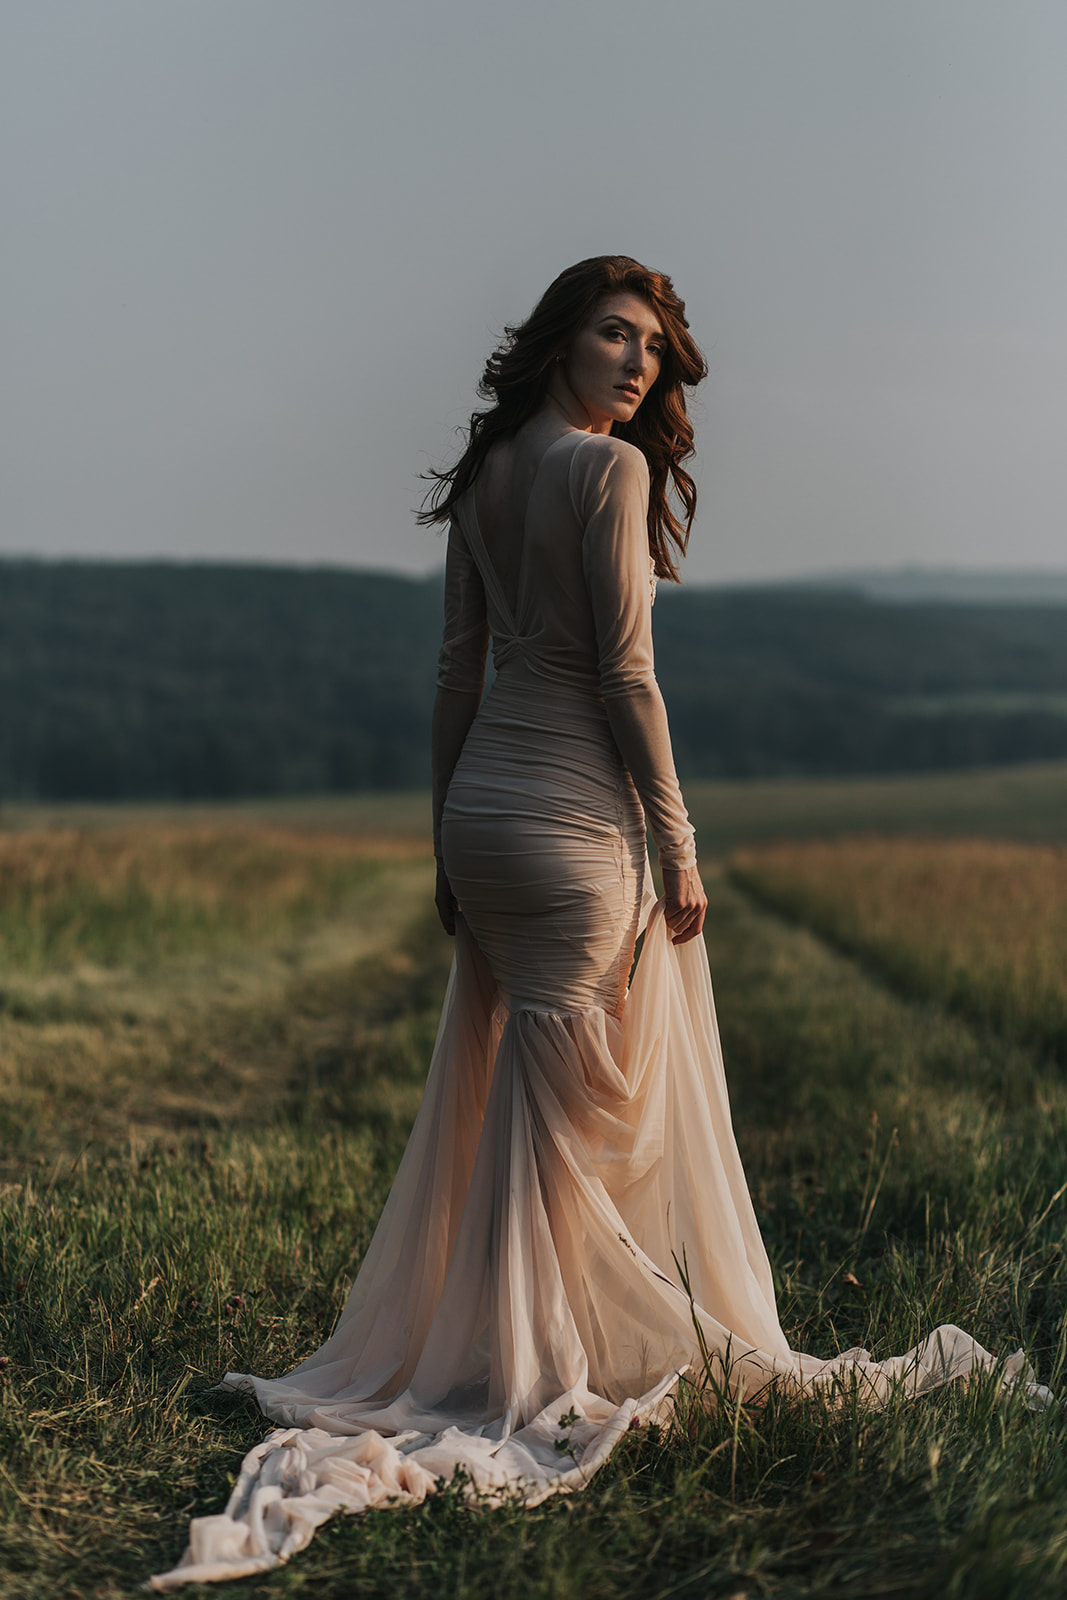 Bridal Portrait Photography Series: Capturing the Beauty of NRT Fashion’s stunning pink couture custom wedding gown